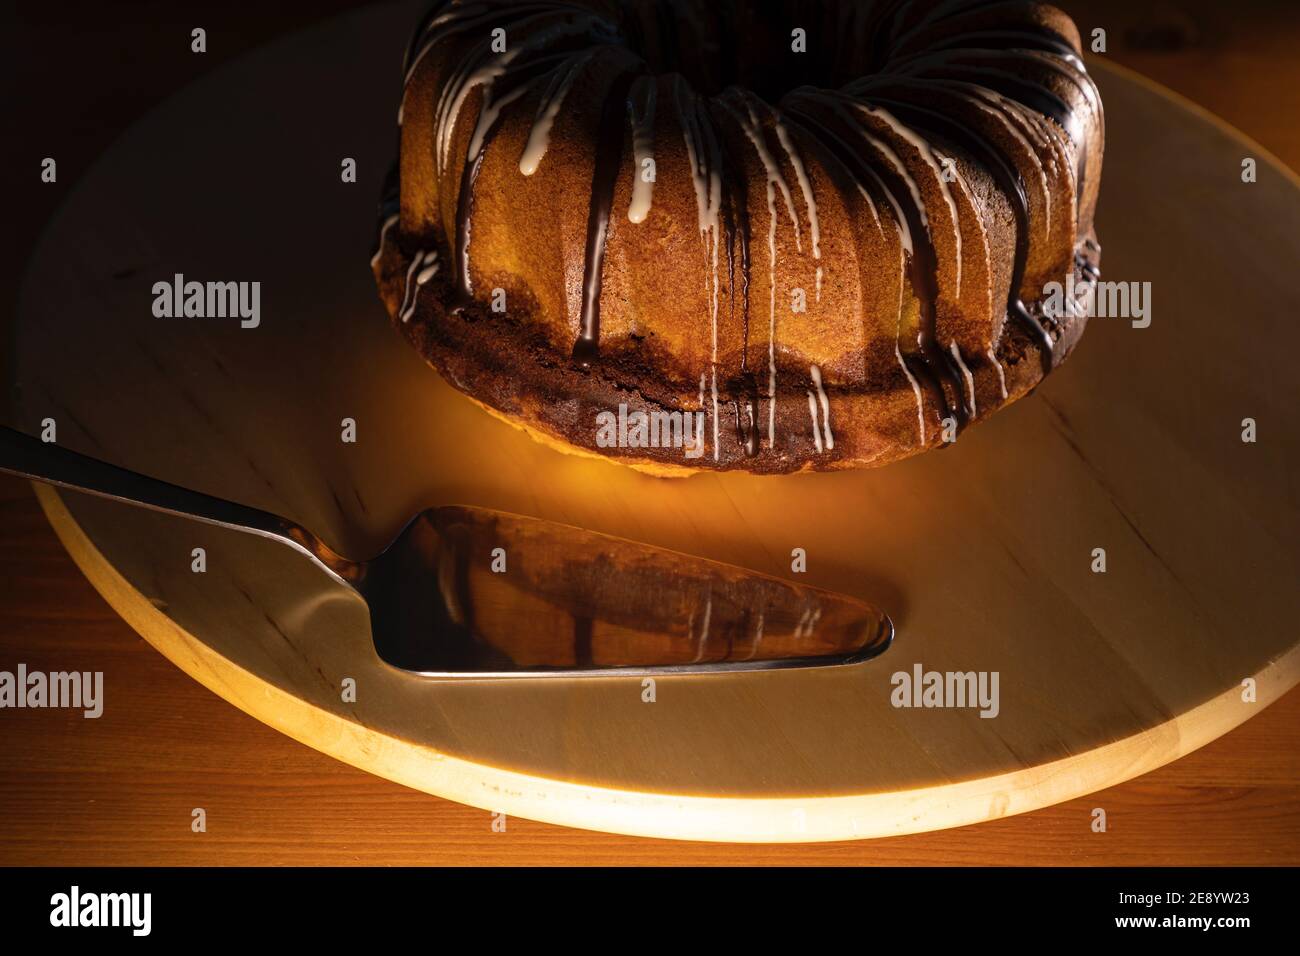 brown sugar coated brundt cake on a white turntable with silver cake shovel, image is focused on the front of the cake and the shovel, warm low light Stock Photo